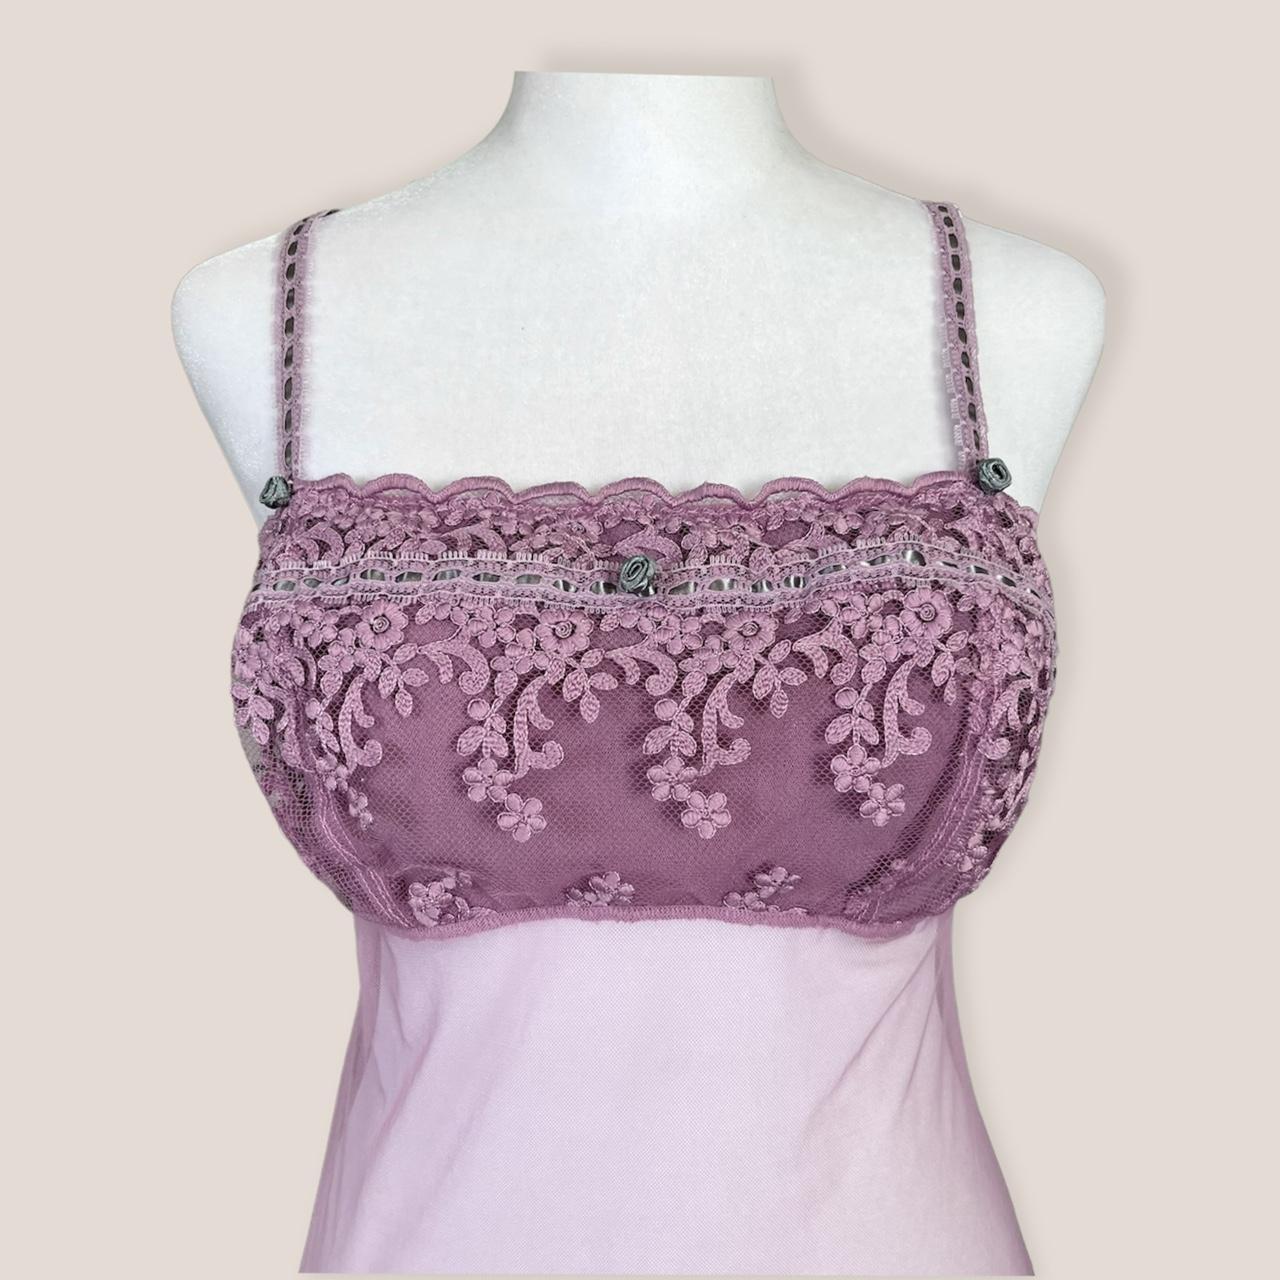 Product Image 2 - ✿Lilac sheer lace chemise✿
The prettiest